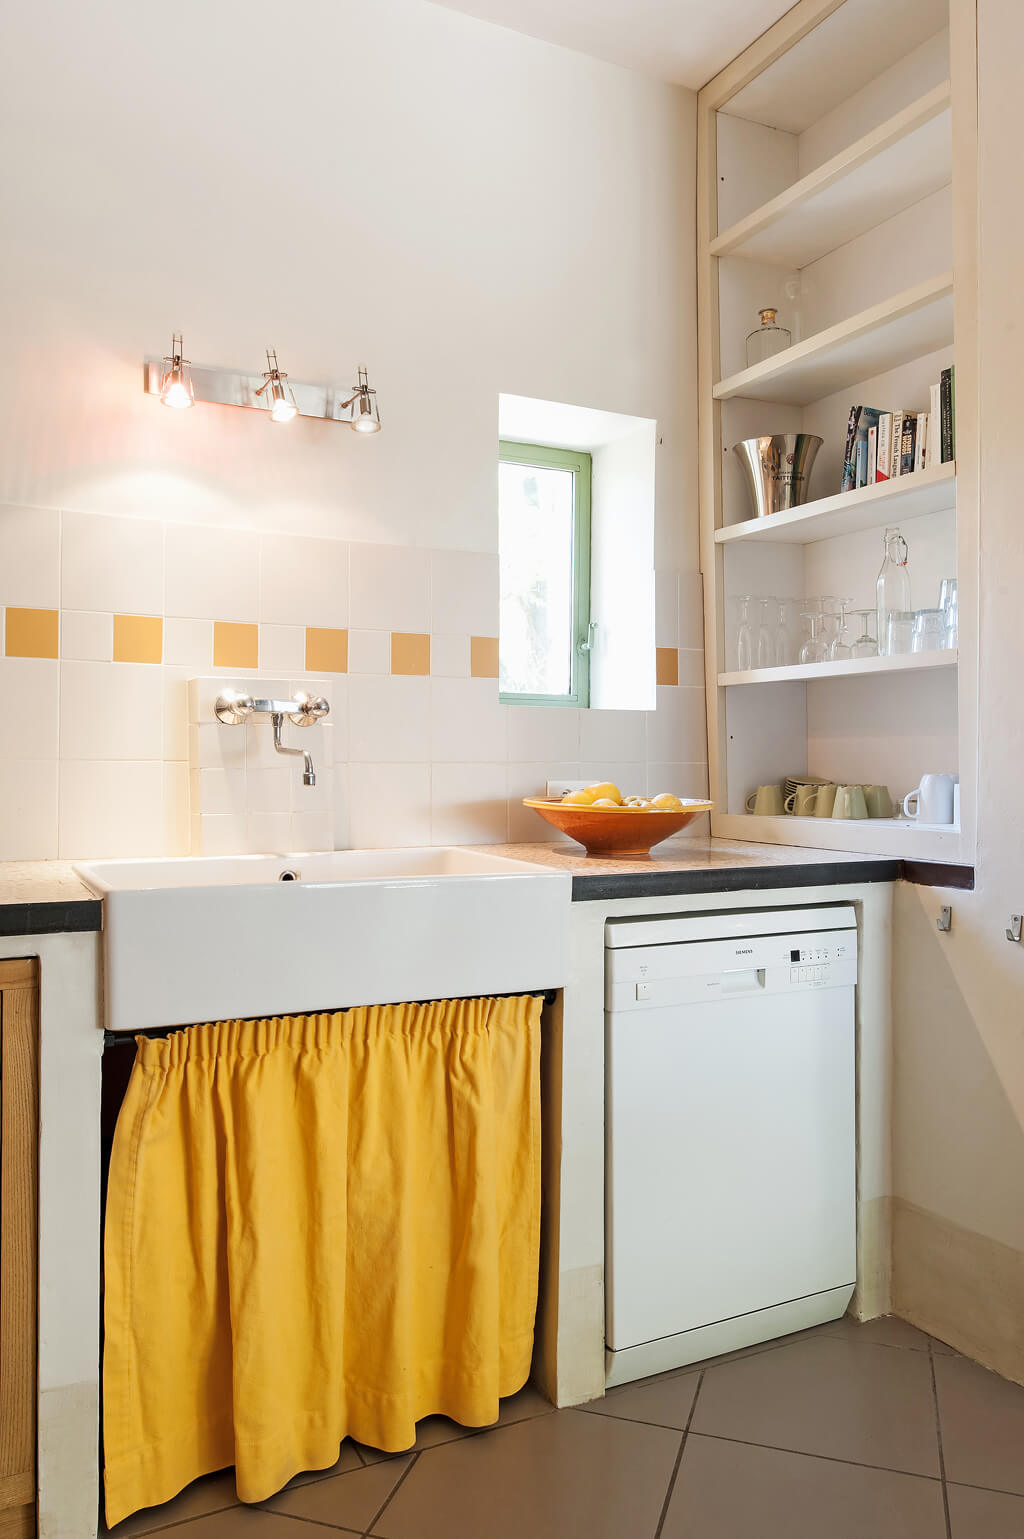 Charming Provence kitchen with bright sunshine yellow skirted sink and accents - Haven In. #frenchkitchen #frenchcountry #brightyellow